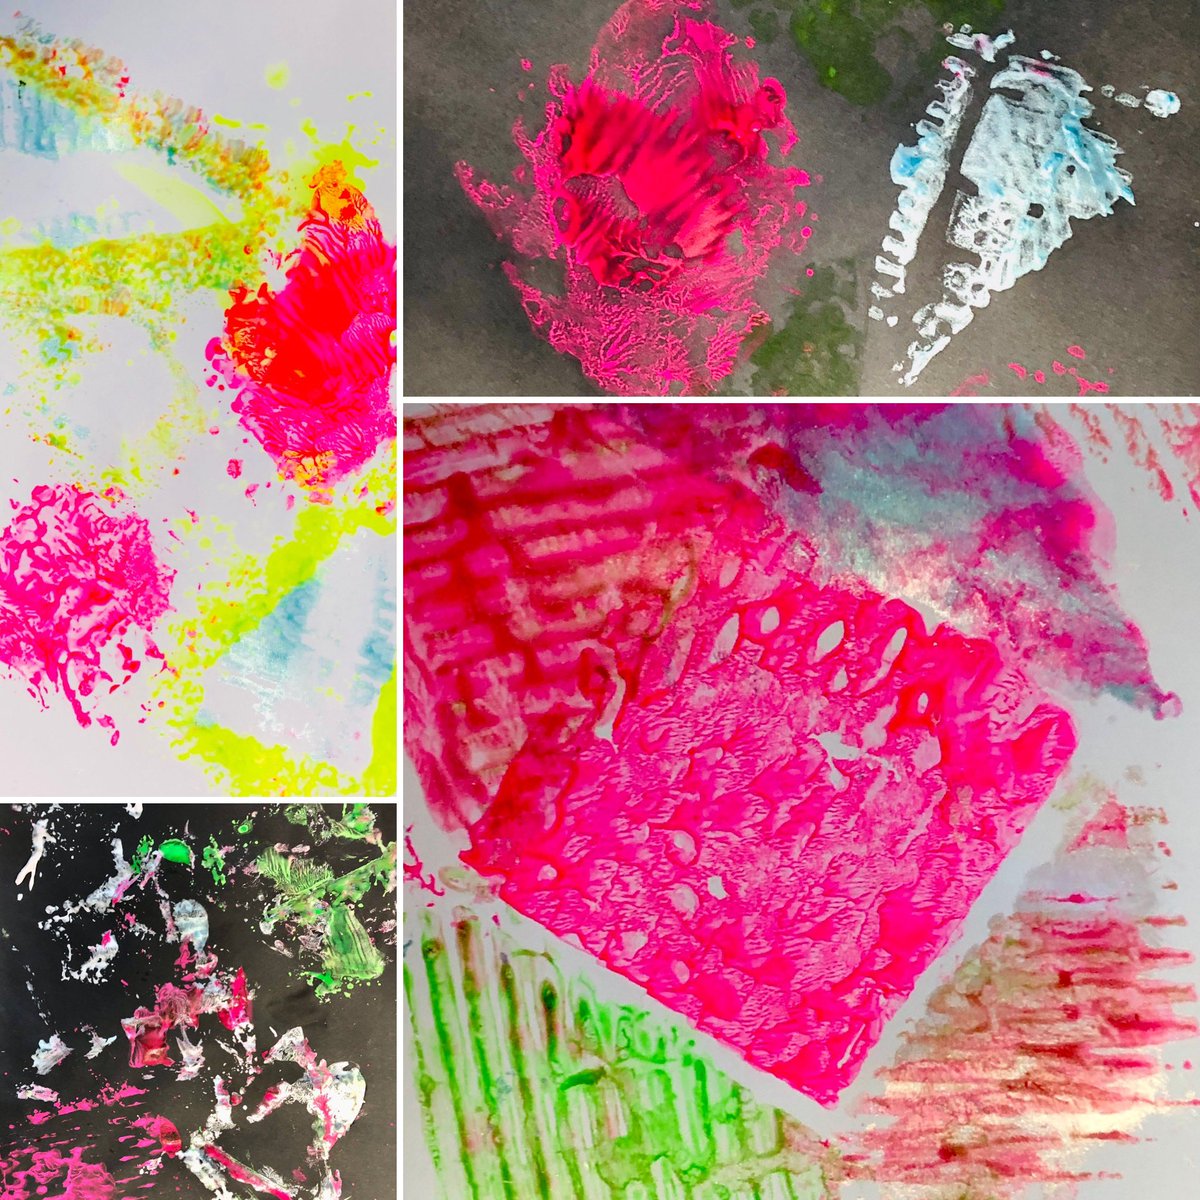 My last day @AshFieldAcad as resident artist & here are the lovely vibrant prints the students created, exploring texture & colour.
Thank you to Phoenix class for making me feel so welcome & part of a team. I’ve learnt so much & loved the experience
#residentartist #artforall